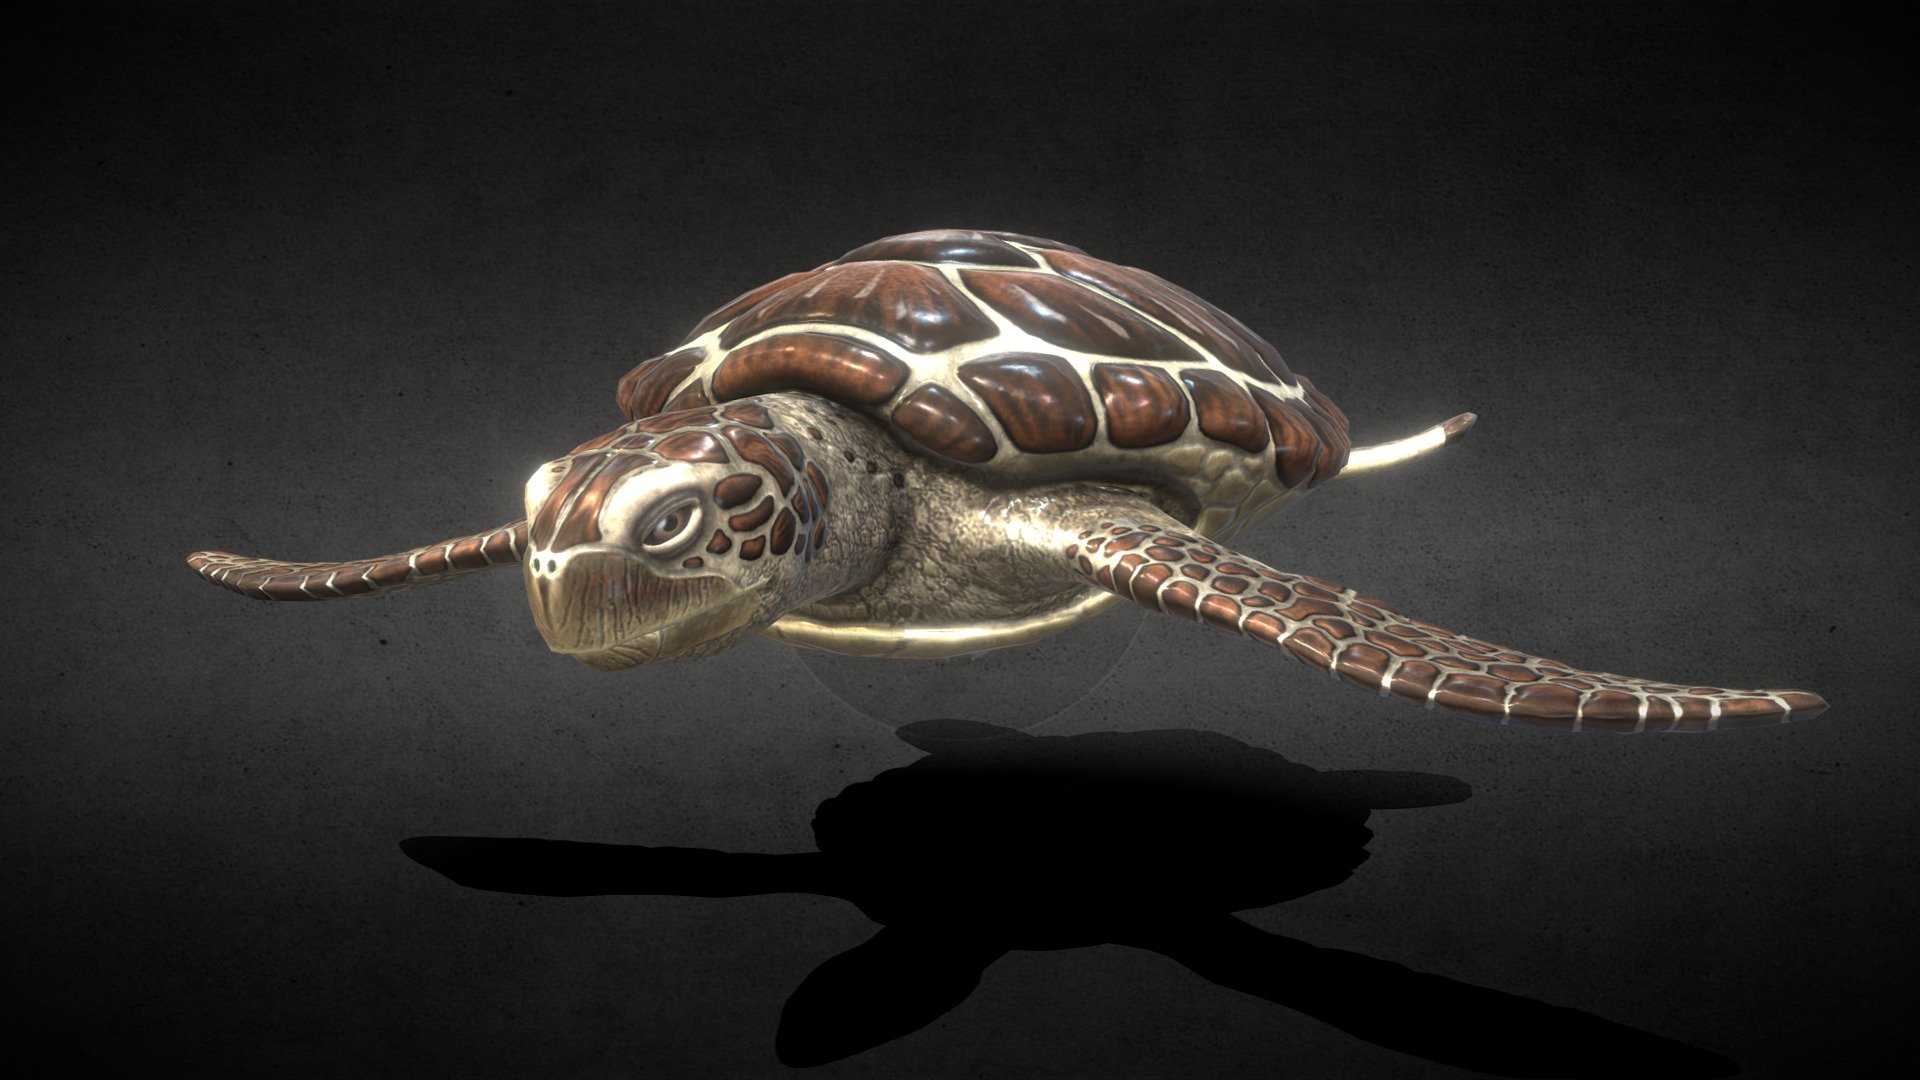 Chelonia mydas. Also known as the green turtle, black (sea) turtle or Pacific green turtle,[4] is a species of large sea turtle of the family Cheloniidae. It is the only species in the genus Chelonia 3d model